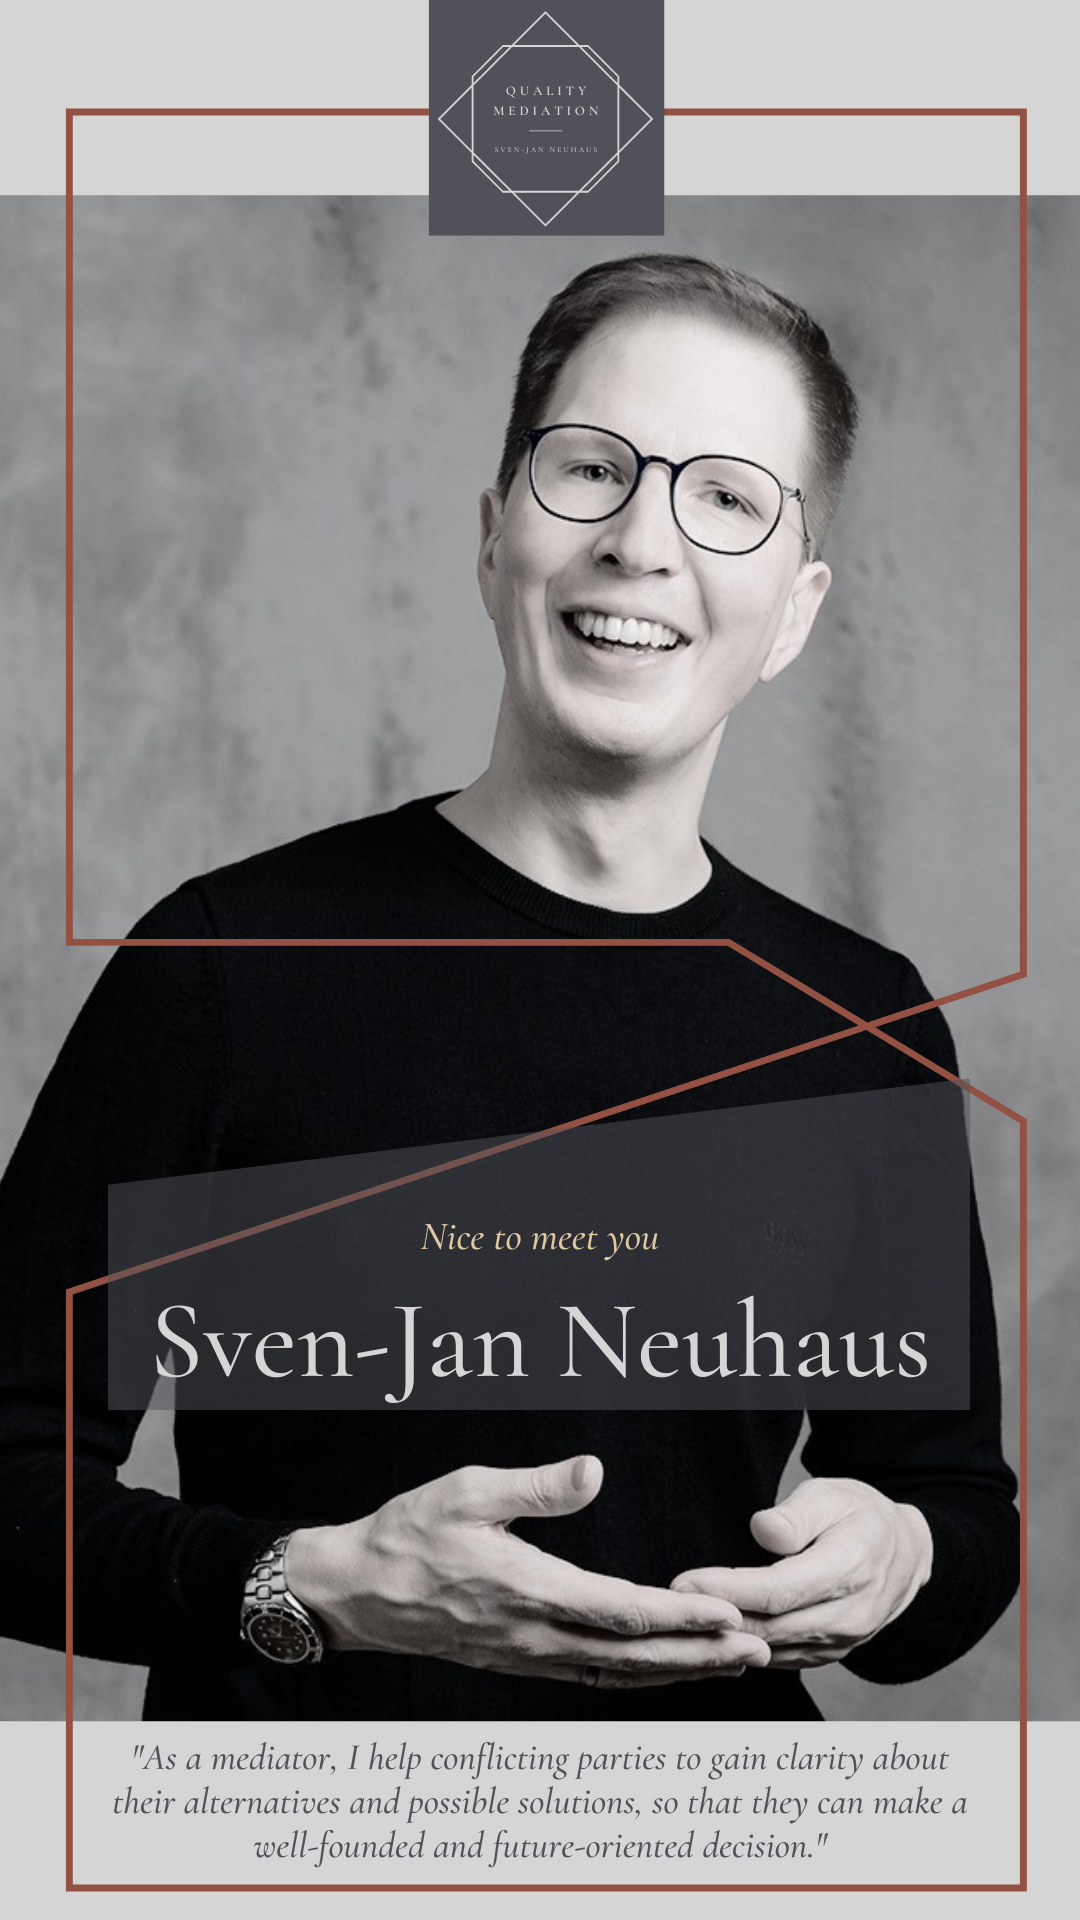 Sven-Jan Neuhaus: "As a mediator, I help conflicting parties to gain clarity about their alternatives and possible solutions, so that they can make a well-founded and future-oriented decision." Nice to meet you Quality Mediation Sven-Jan Neuhaus svenjanneuhaus.de